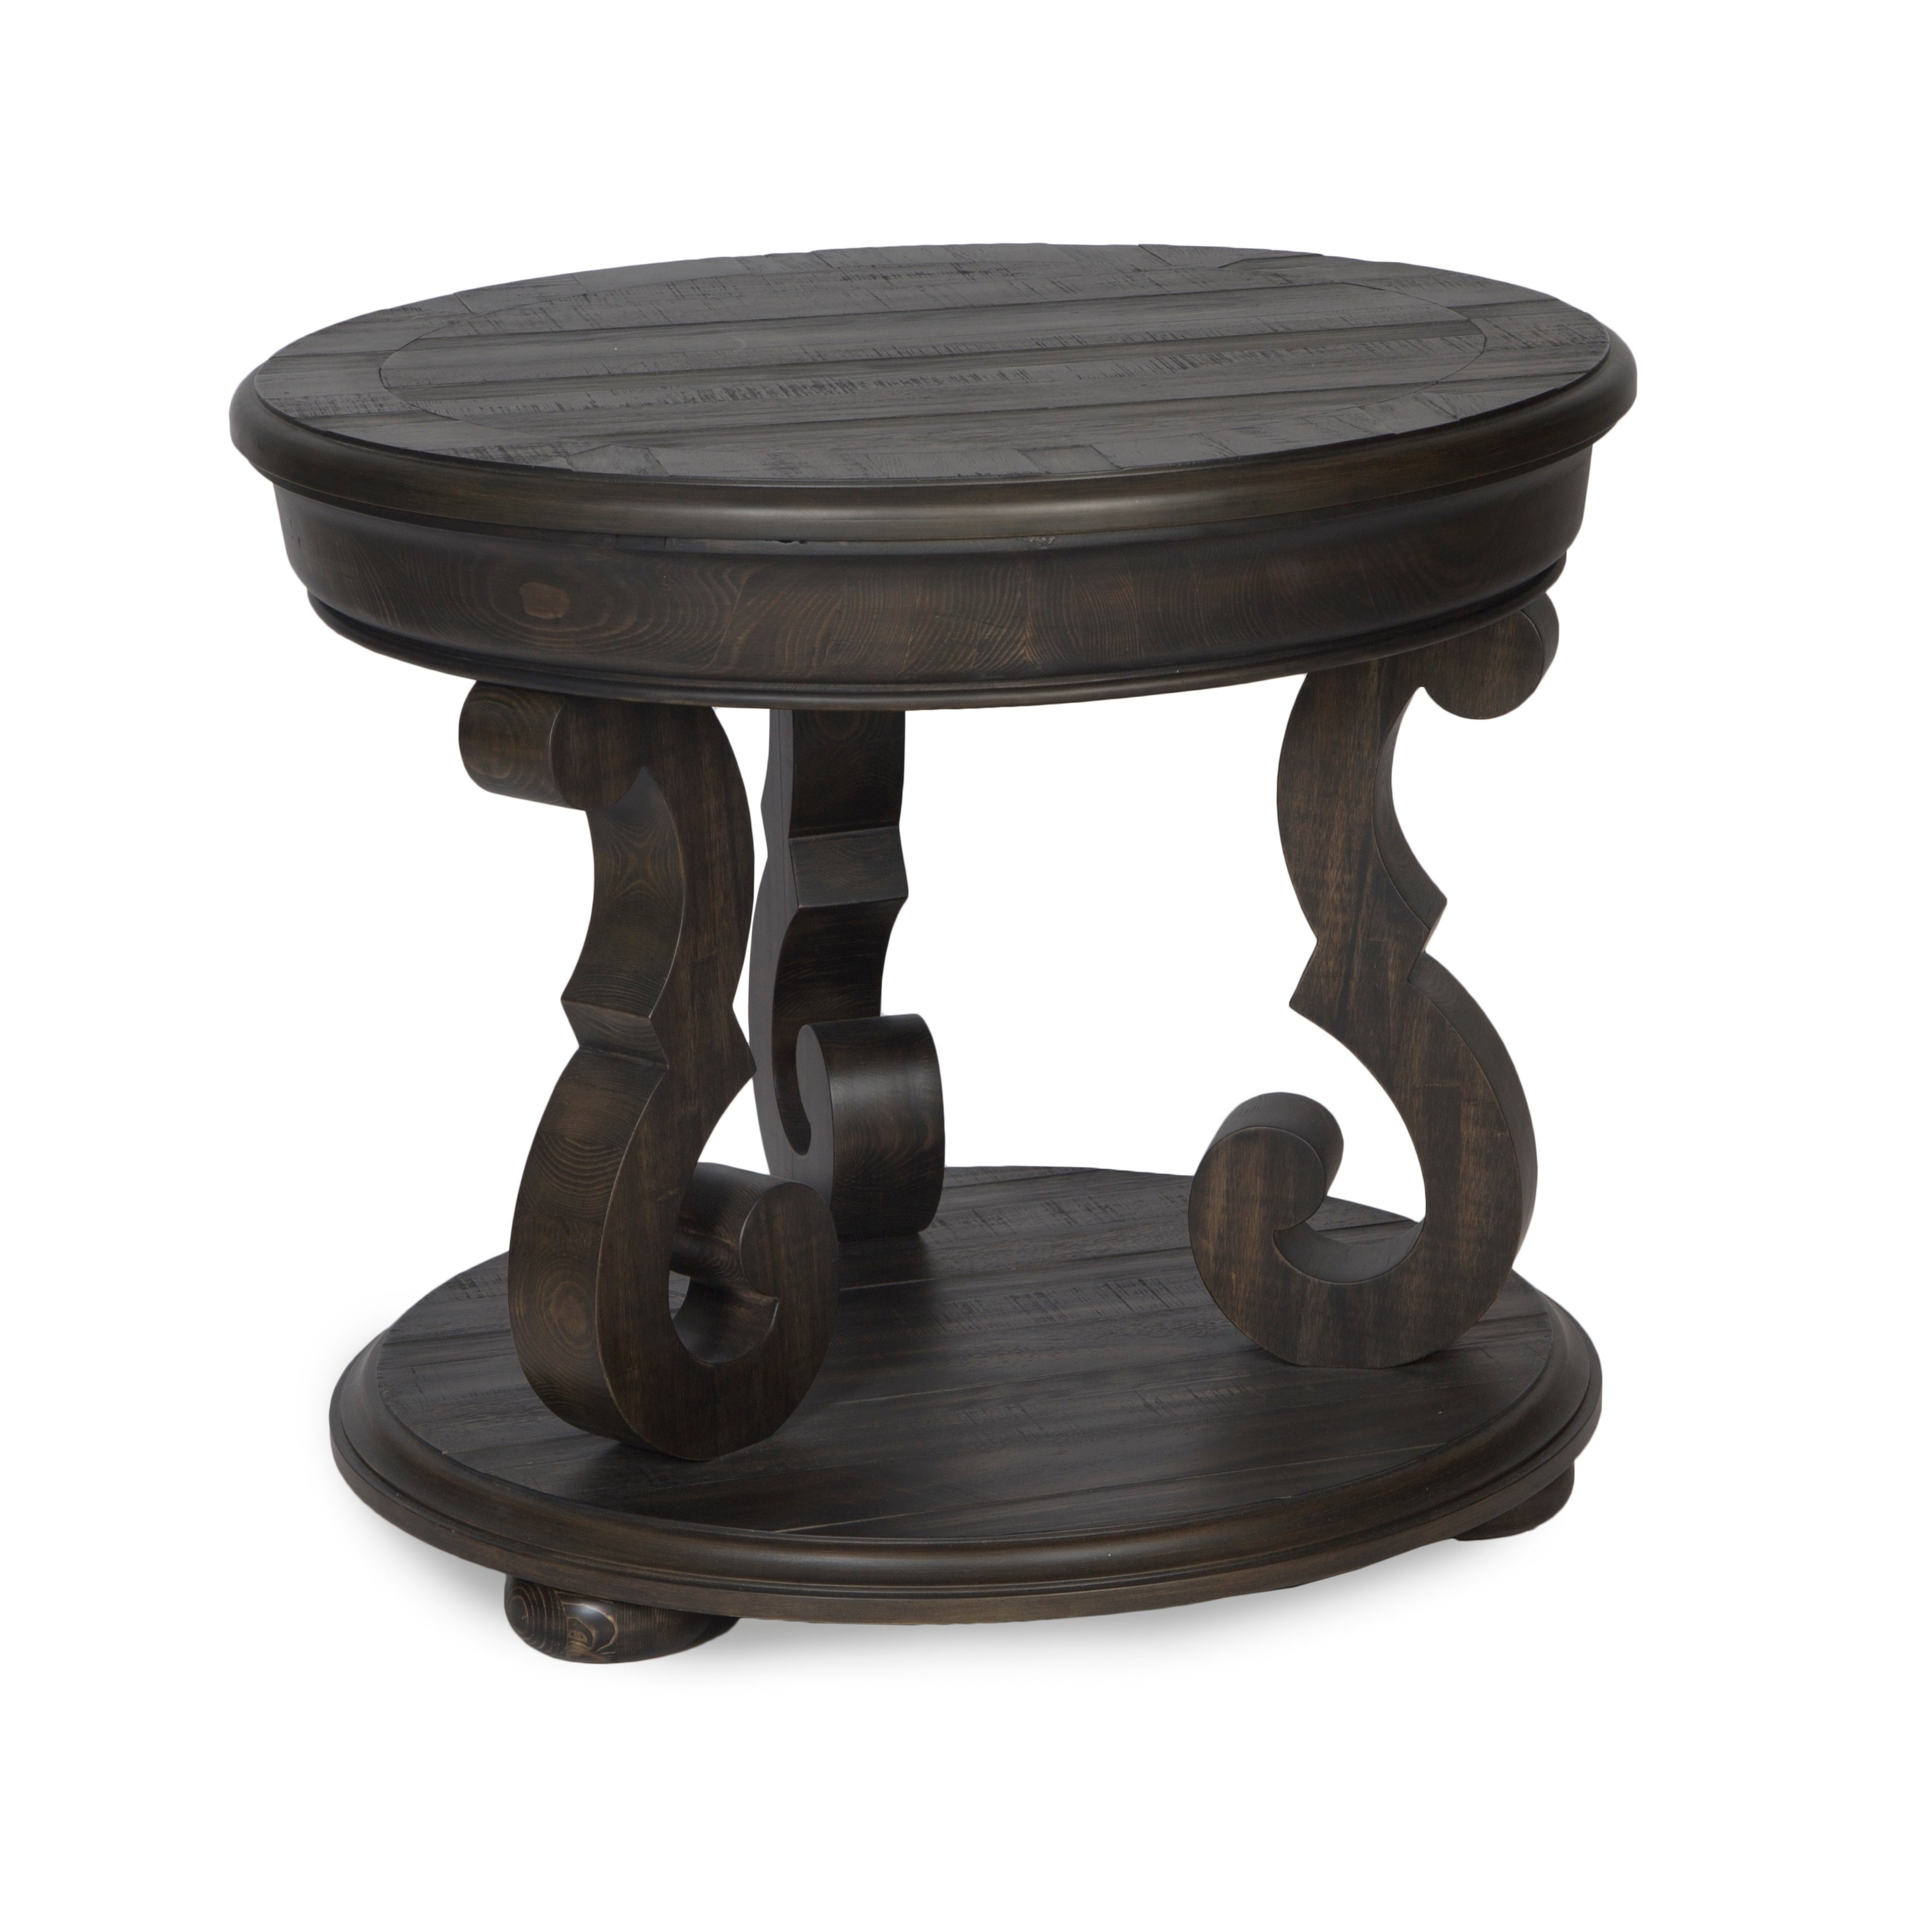 florence traditional distressed charcoal rustic round accent table black free shipping today marble dining room and chairs small balcony umbrella patio amish tables espresso brown